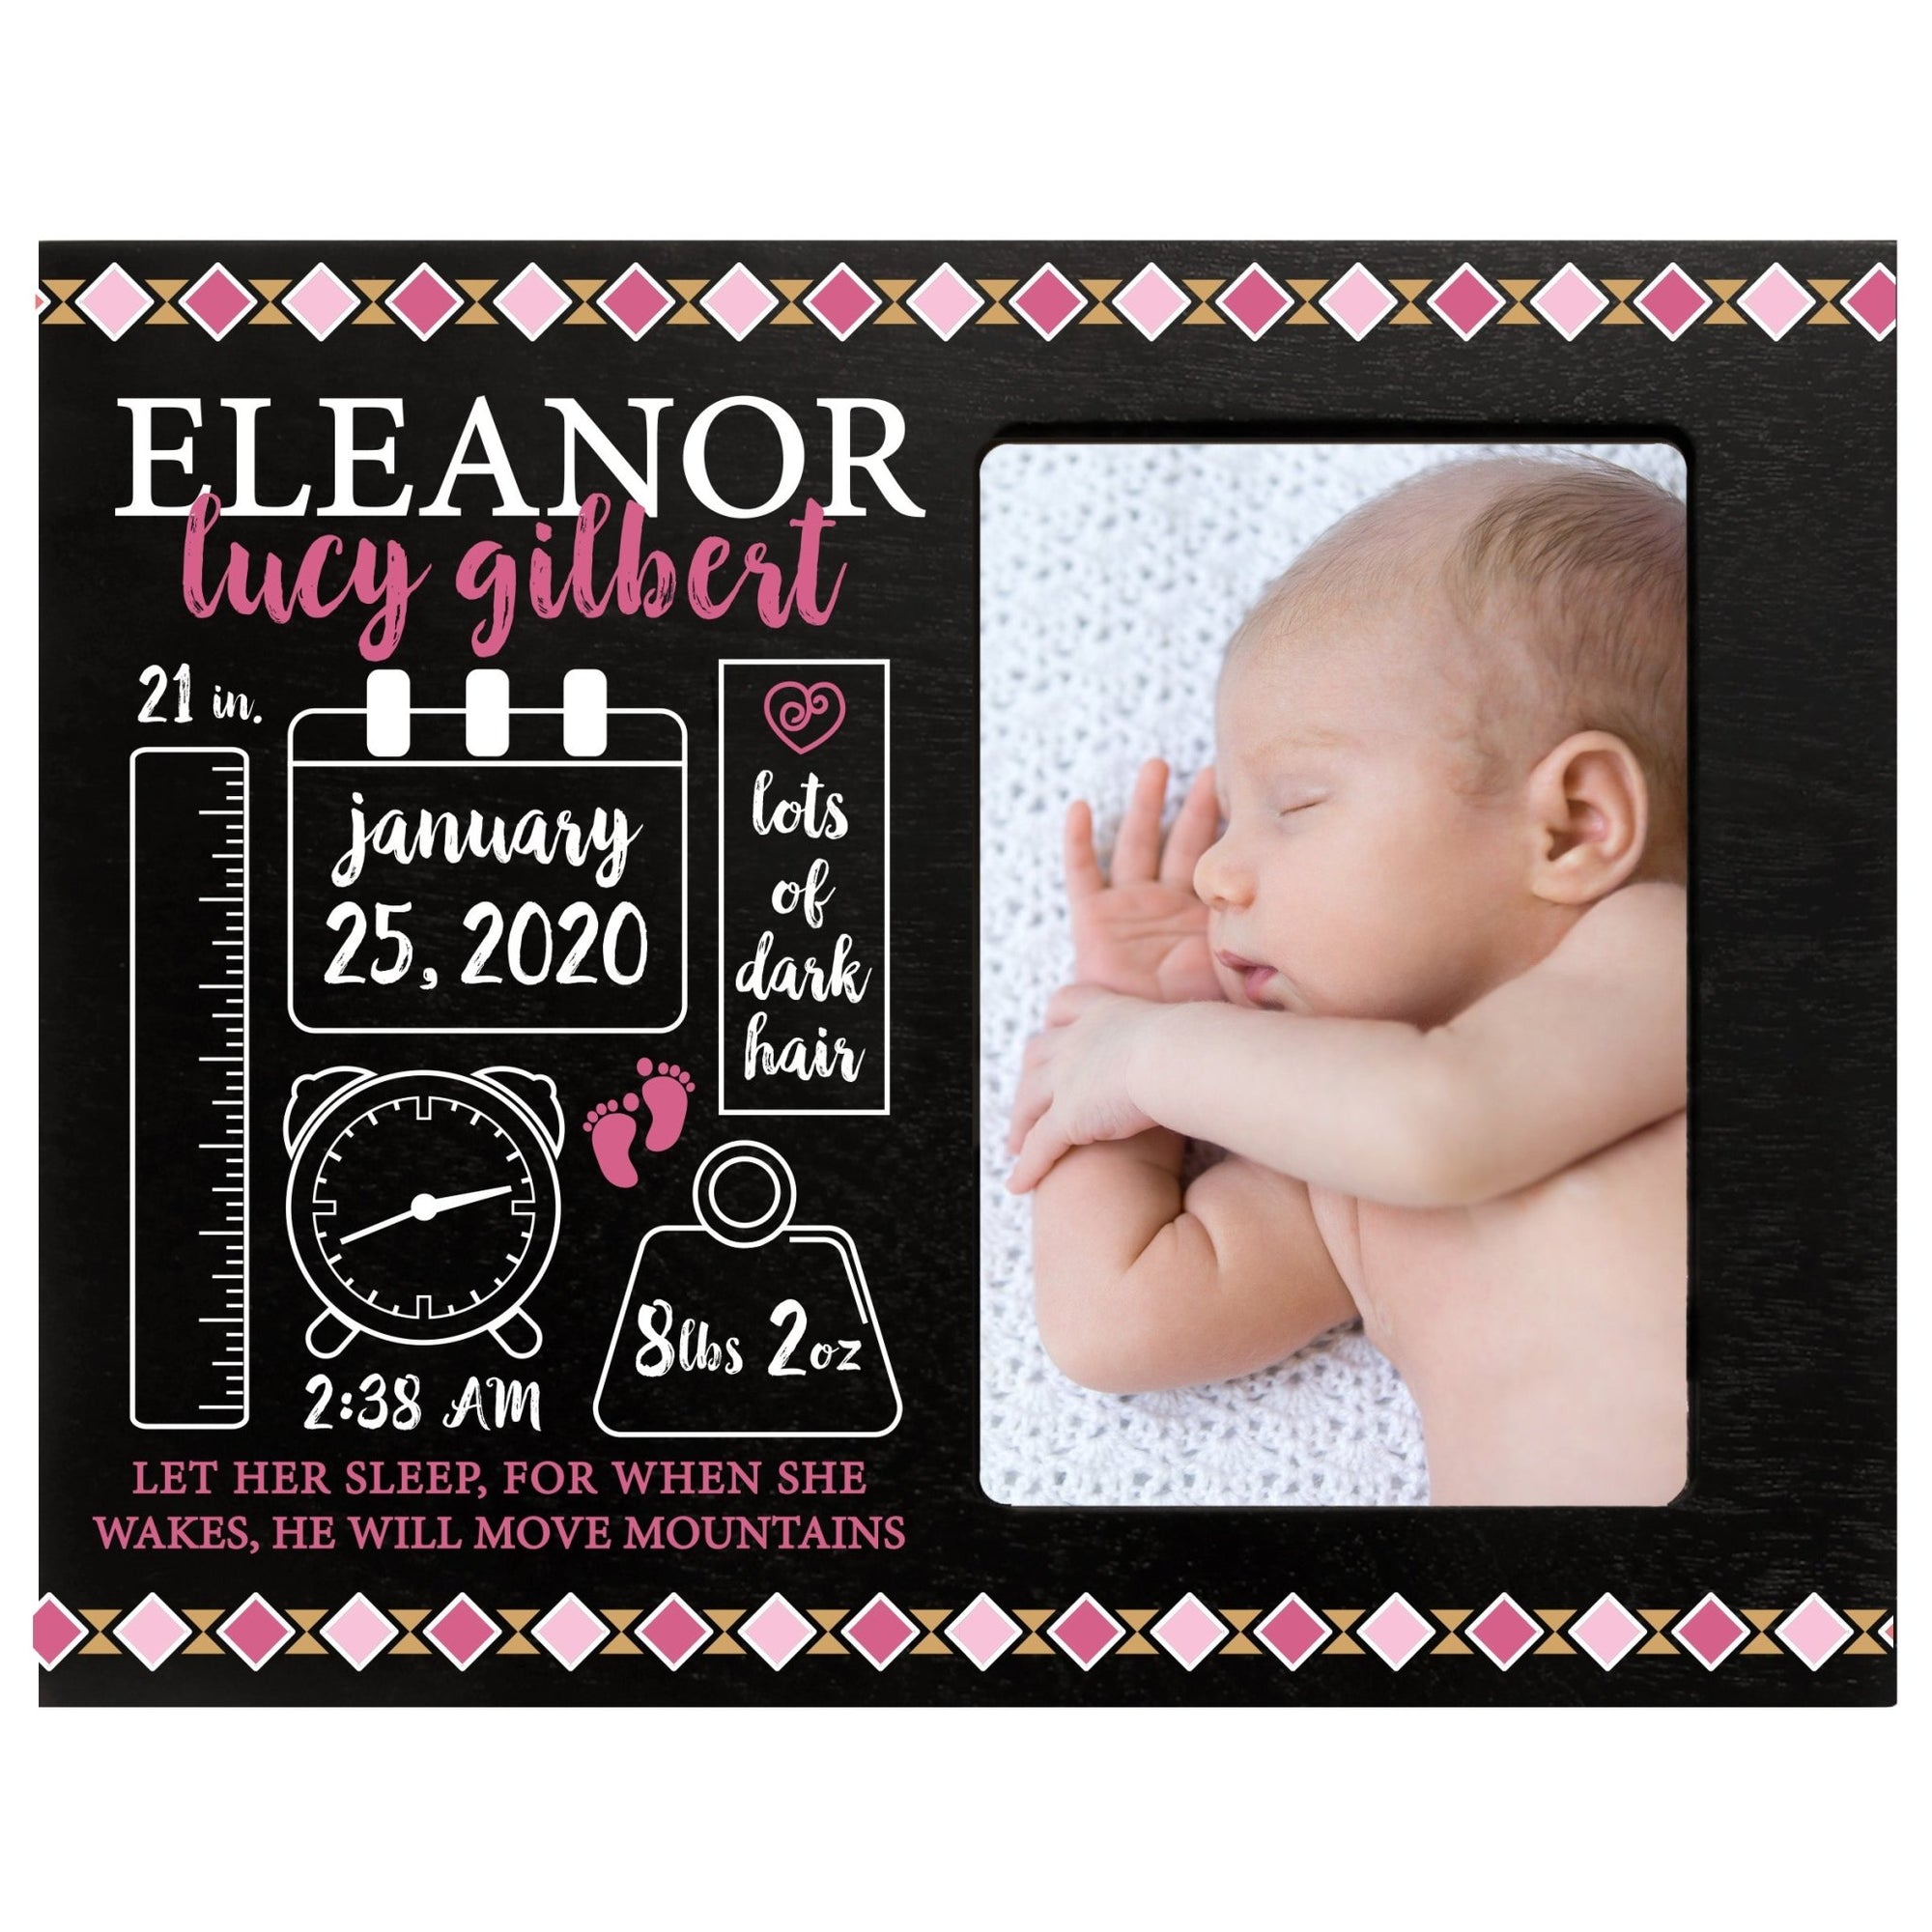 Personalized Newborn Baby Birth Stats Picture Frame - Tribal - LifeSong Milestones